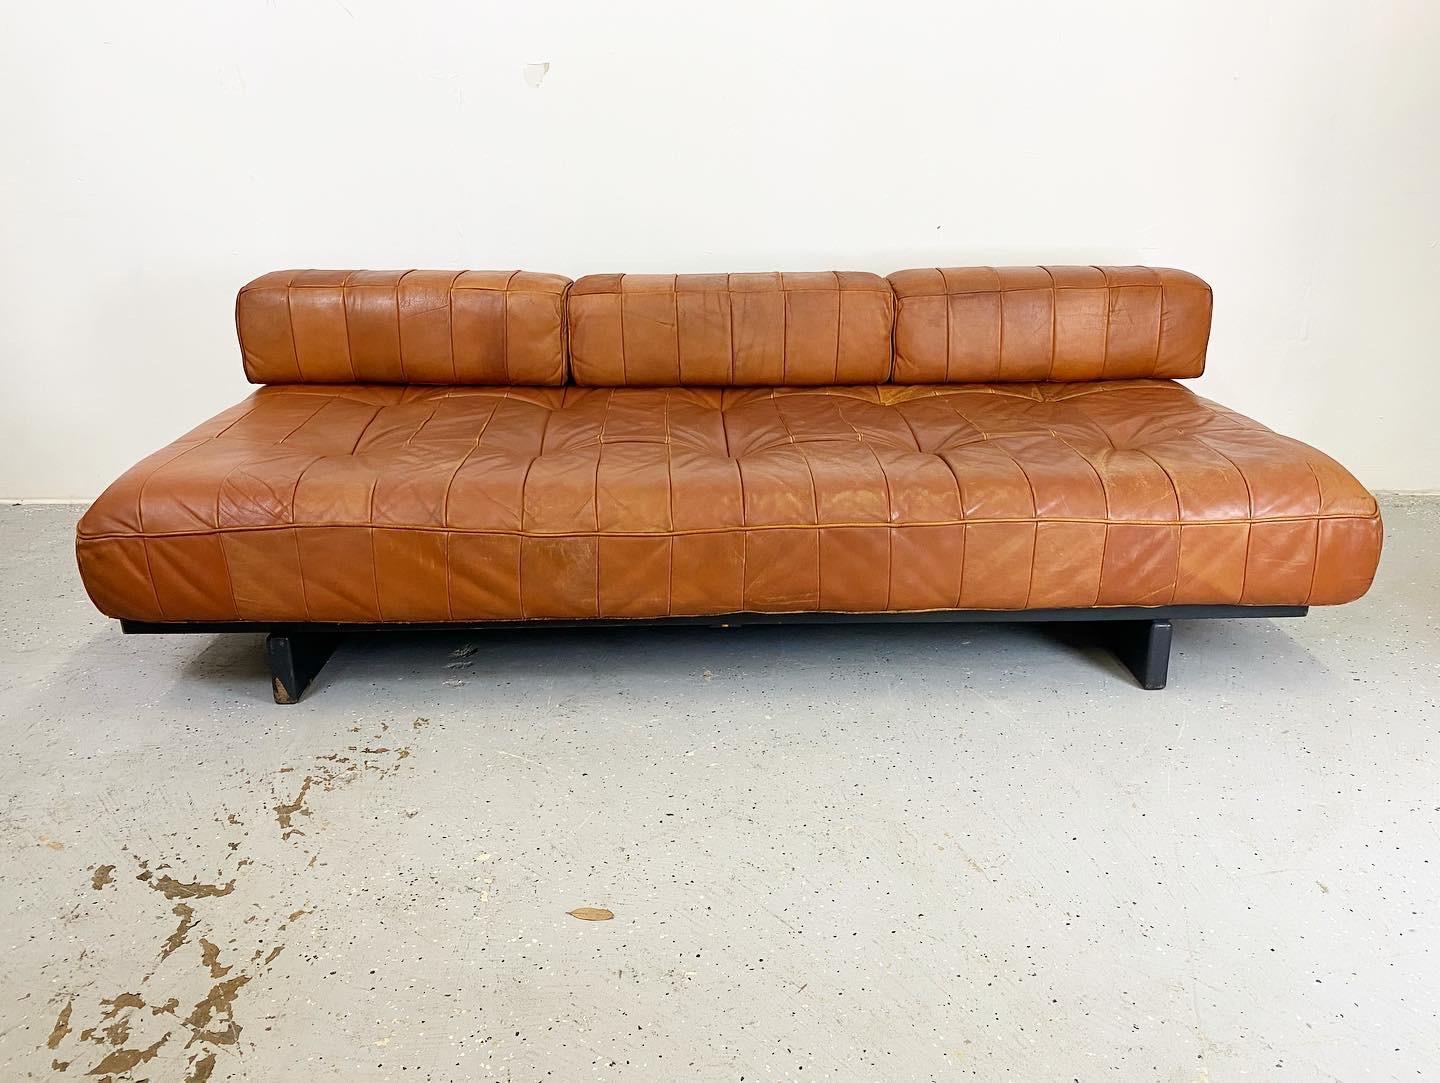 An excellent vintage example of the Patchwork Daybed in good condition. Low seat with removable arm. This piece is deep for lounging and has room to relax and lay. Leather shows age appropriate wear and the painted birch frame has some paint loss.